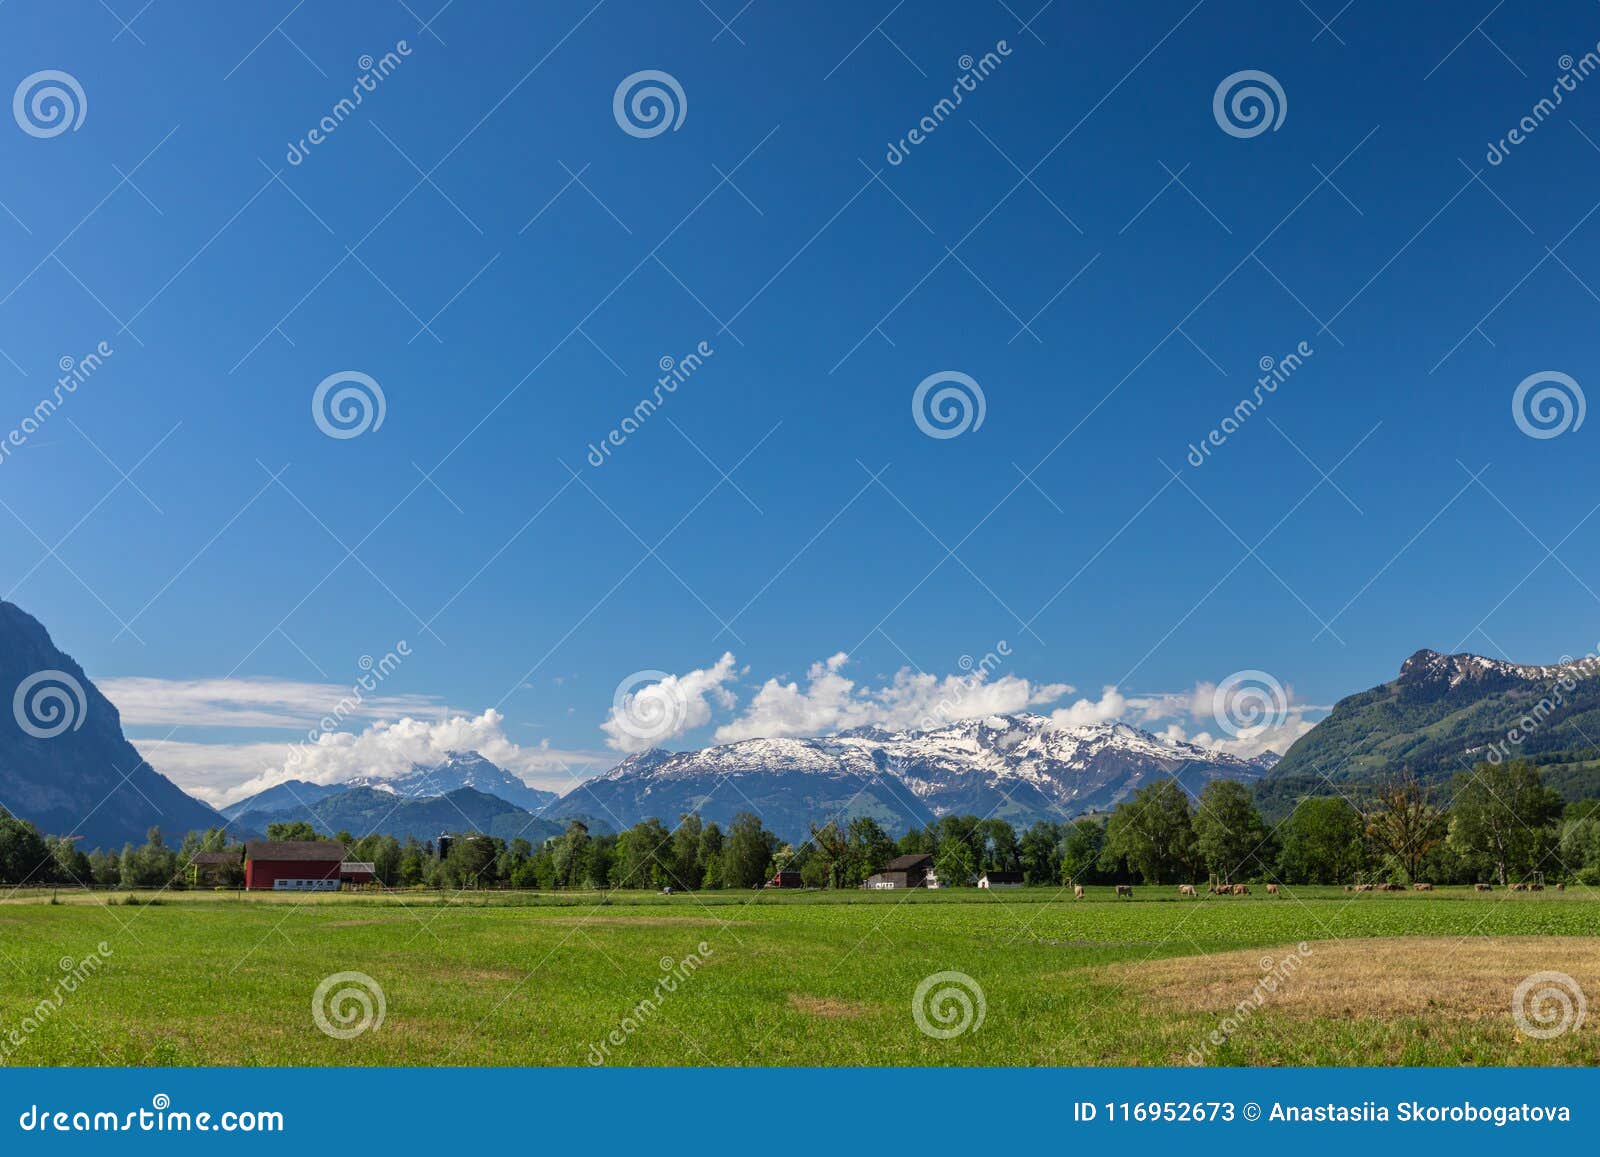 View of the Green Field and Mountains of the Alps in Liechtenstein ...